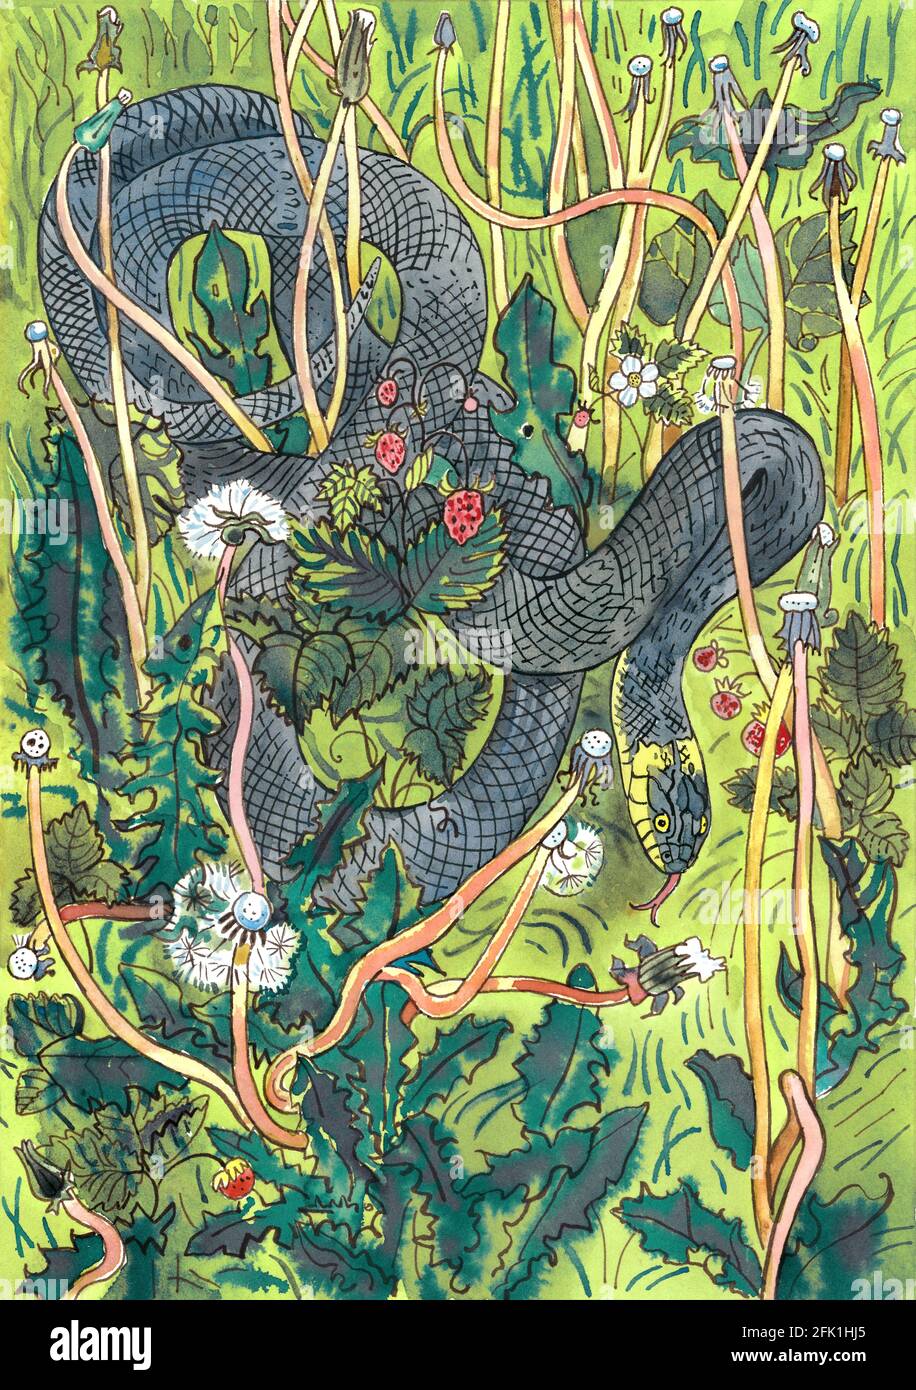 Grass snake in the summer meadow among dandelions and strawberries. Hand drawn ink and watercolor illustration. Nature, environment, children book. Stock Photo